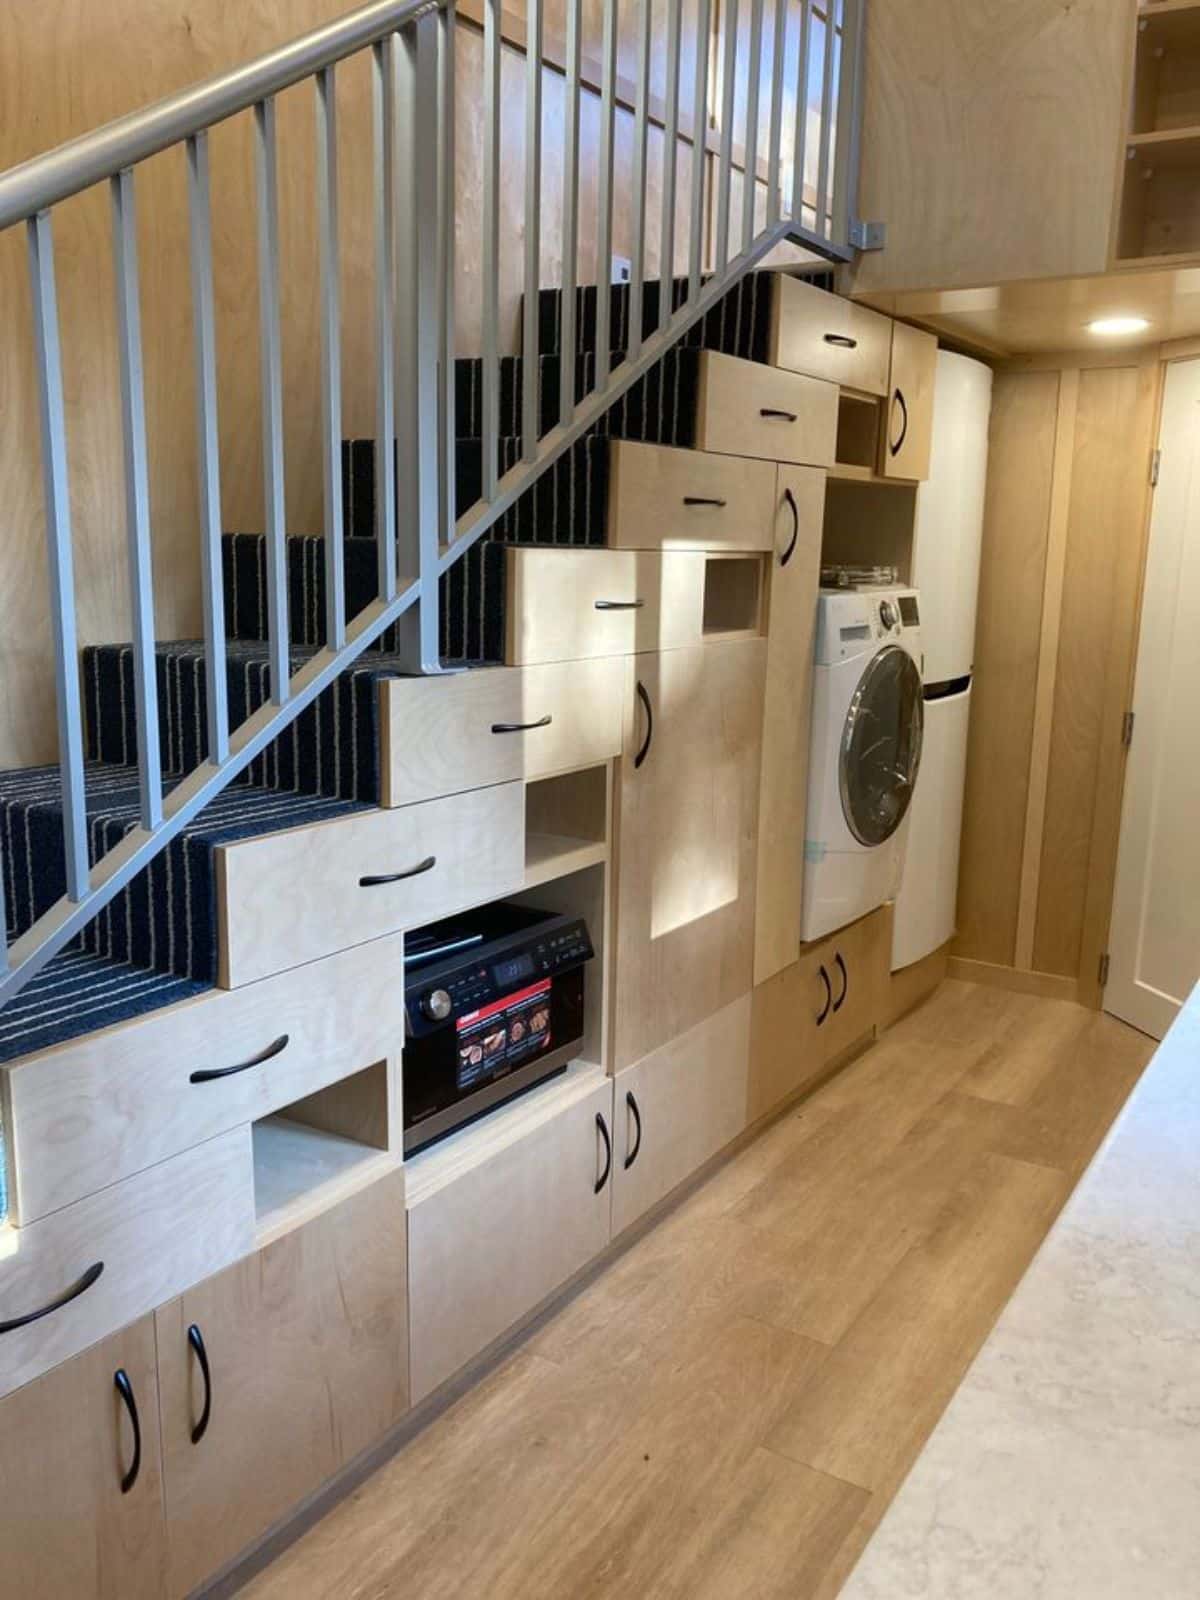 multi purpose stairs with storage cabinets leading to the loft